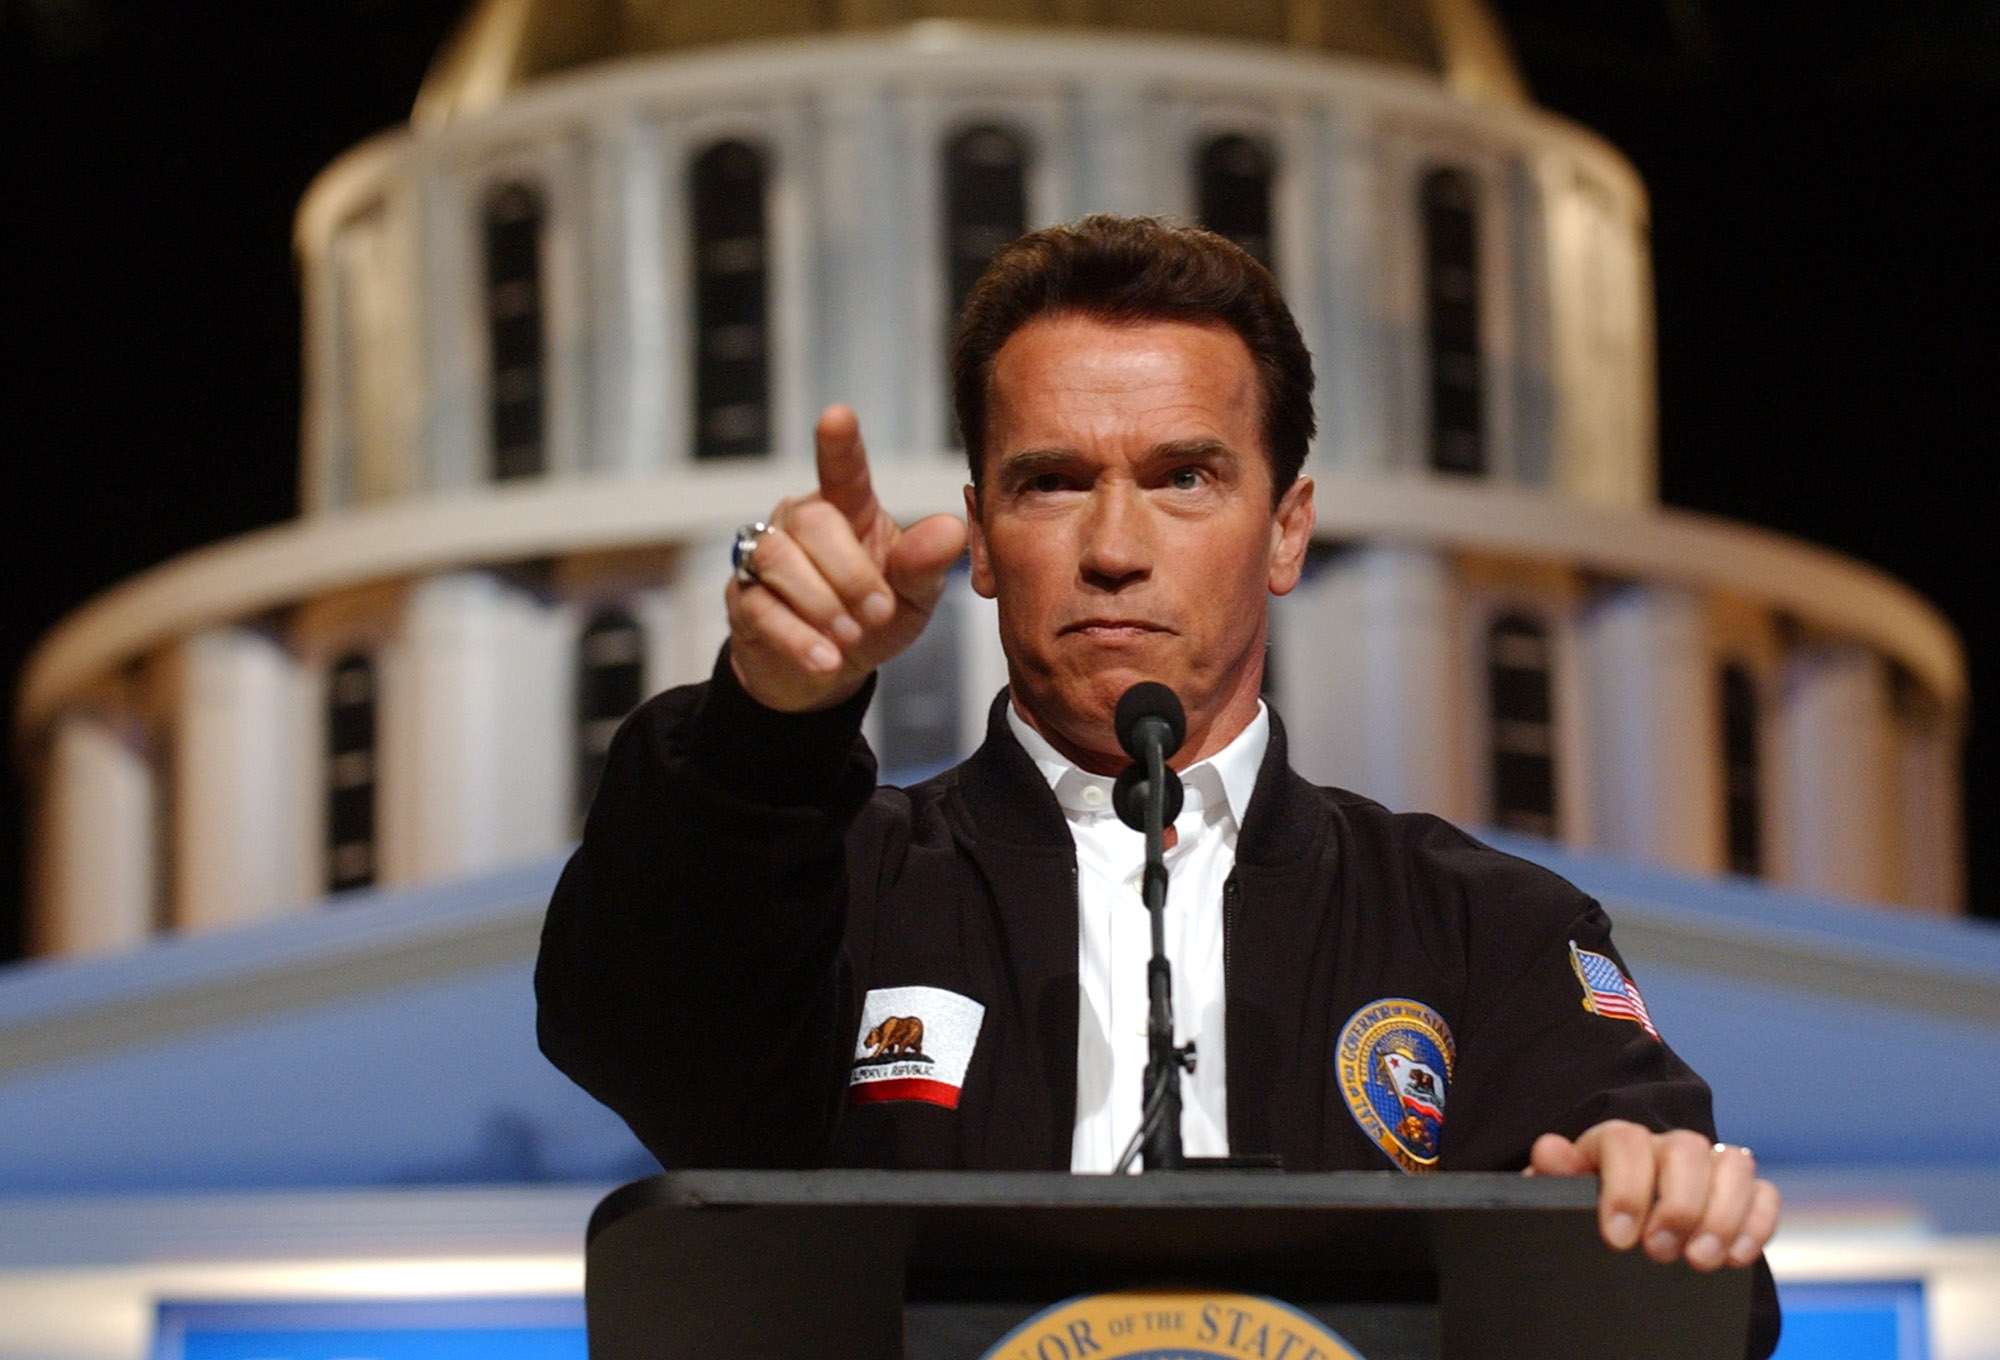 It's going to be 12 years since Arnold Shwarzenegger became the 

governor of California.